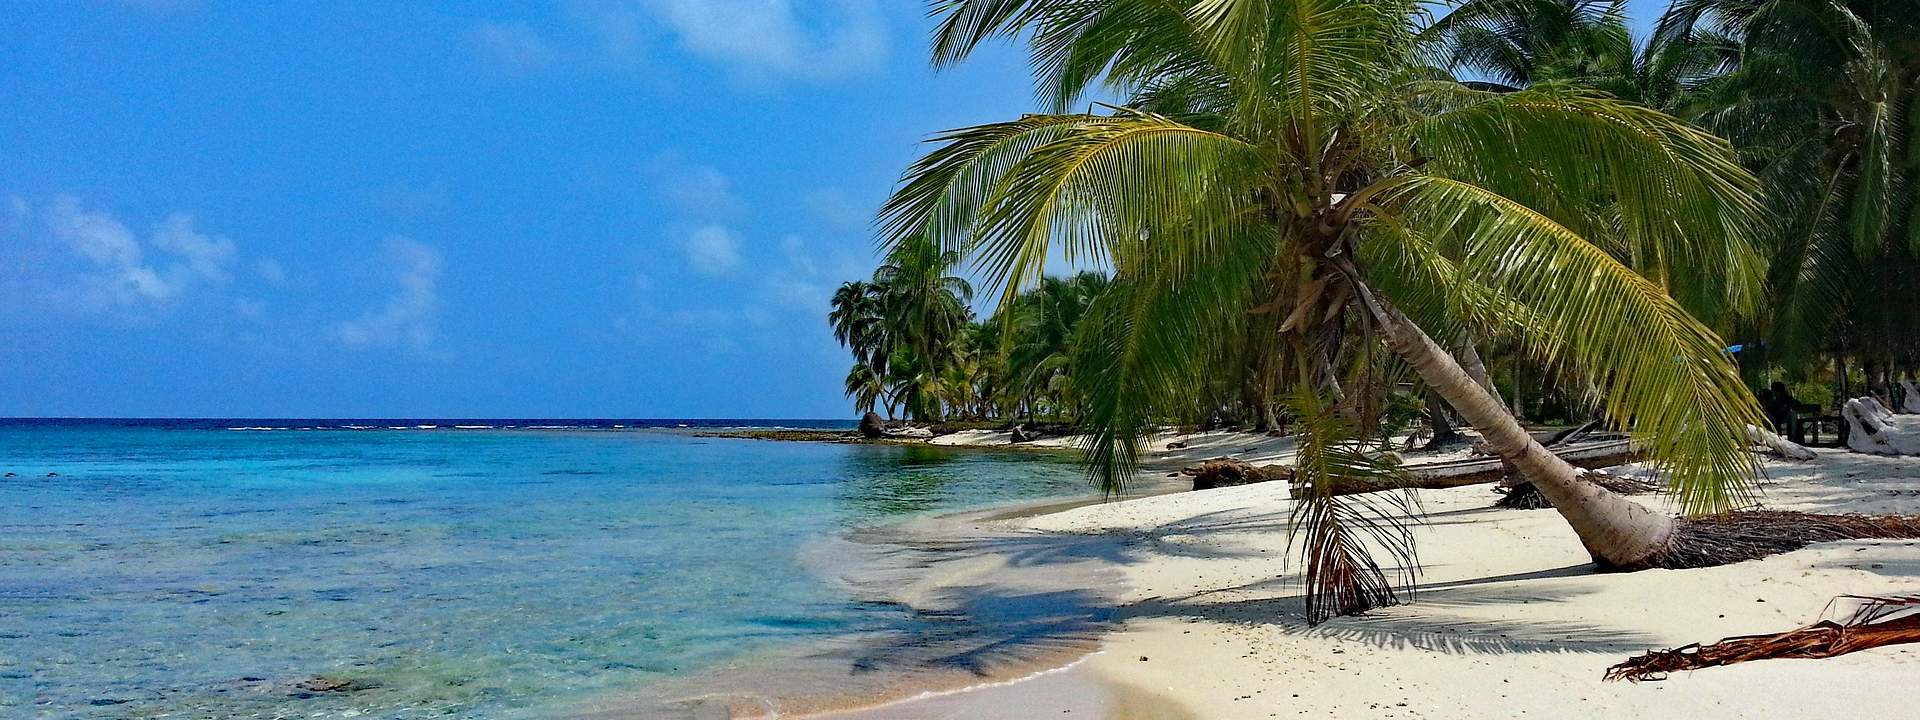 Explore the archipelago of the San Blas Islands by boat